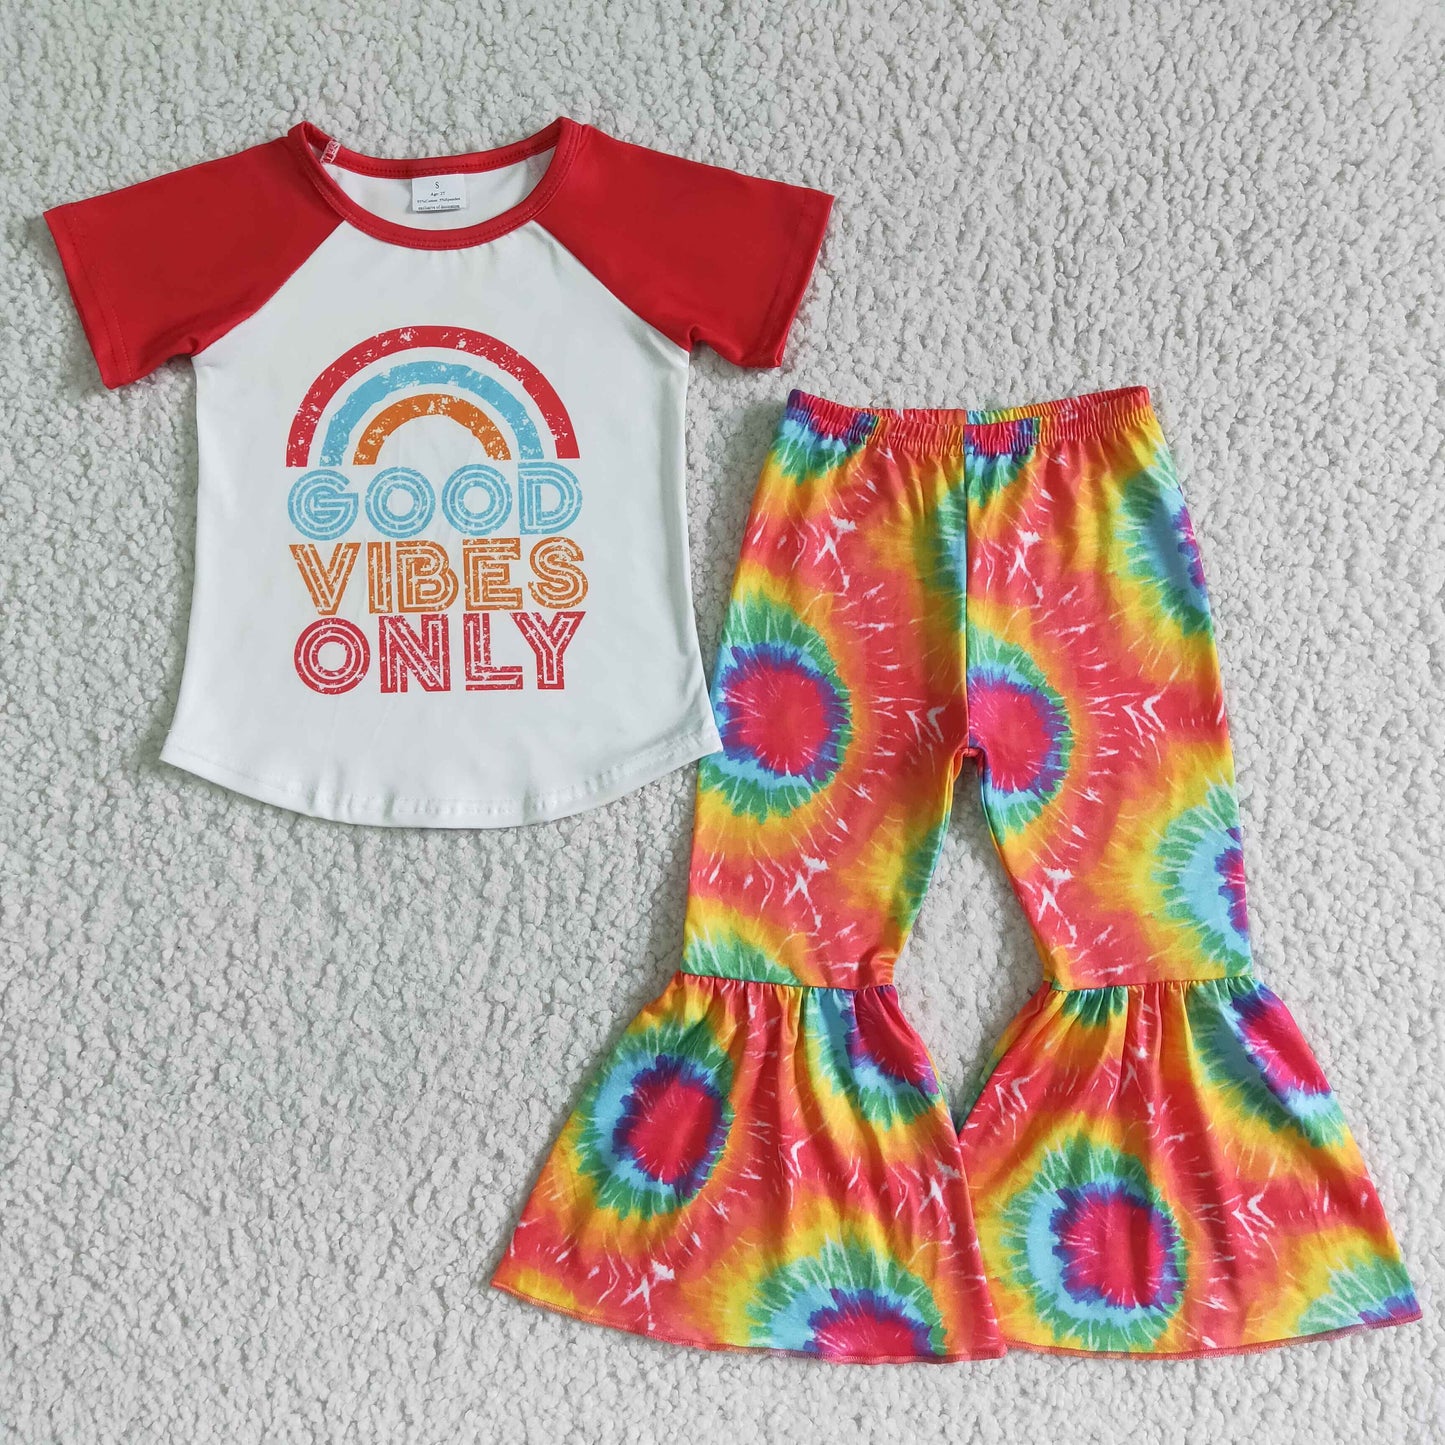 Good vibes only girl rainbow tie dye outfit